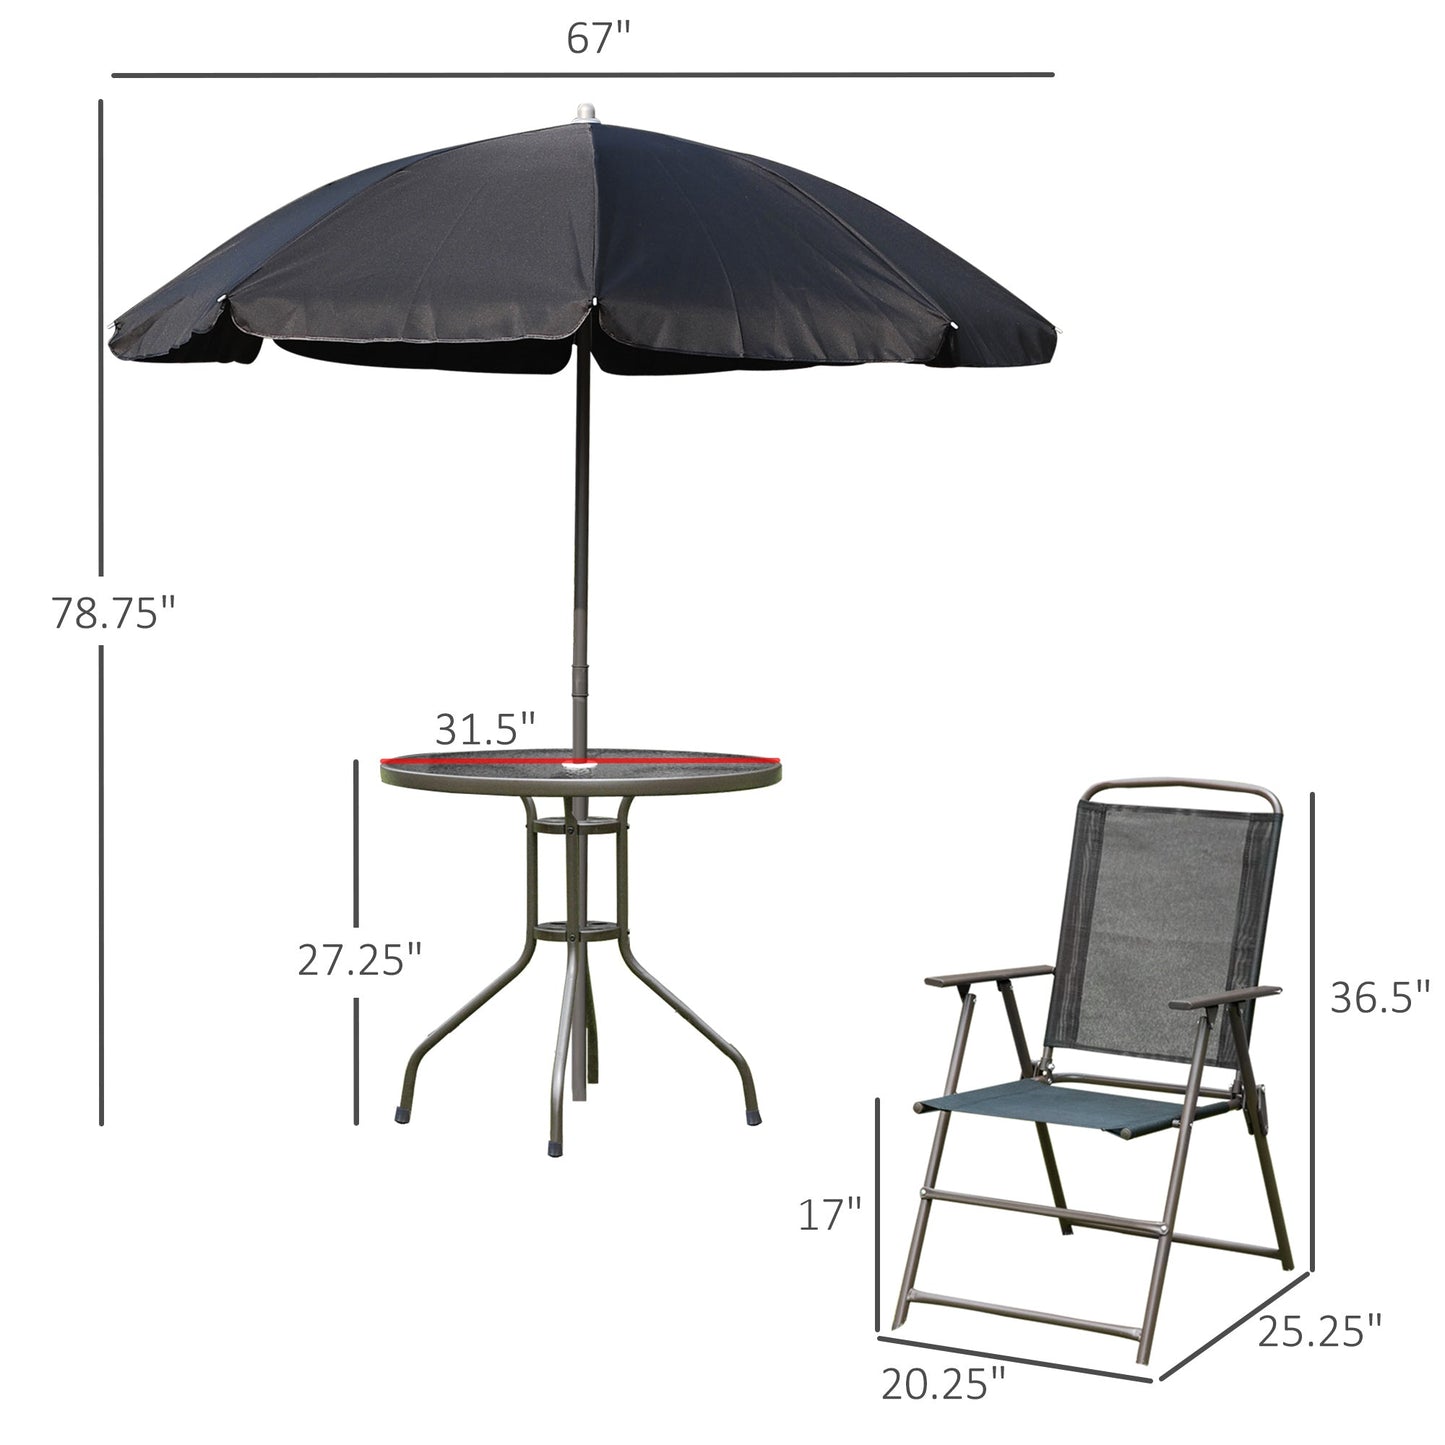 Outdoor and Garden-6 Piece Patio Dining Set for 4 with Umbrella, 4 Folding Dining Chairs & Round Glass Table for Garden, Backyard and Poolside, Black - Outdoor Style Company